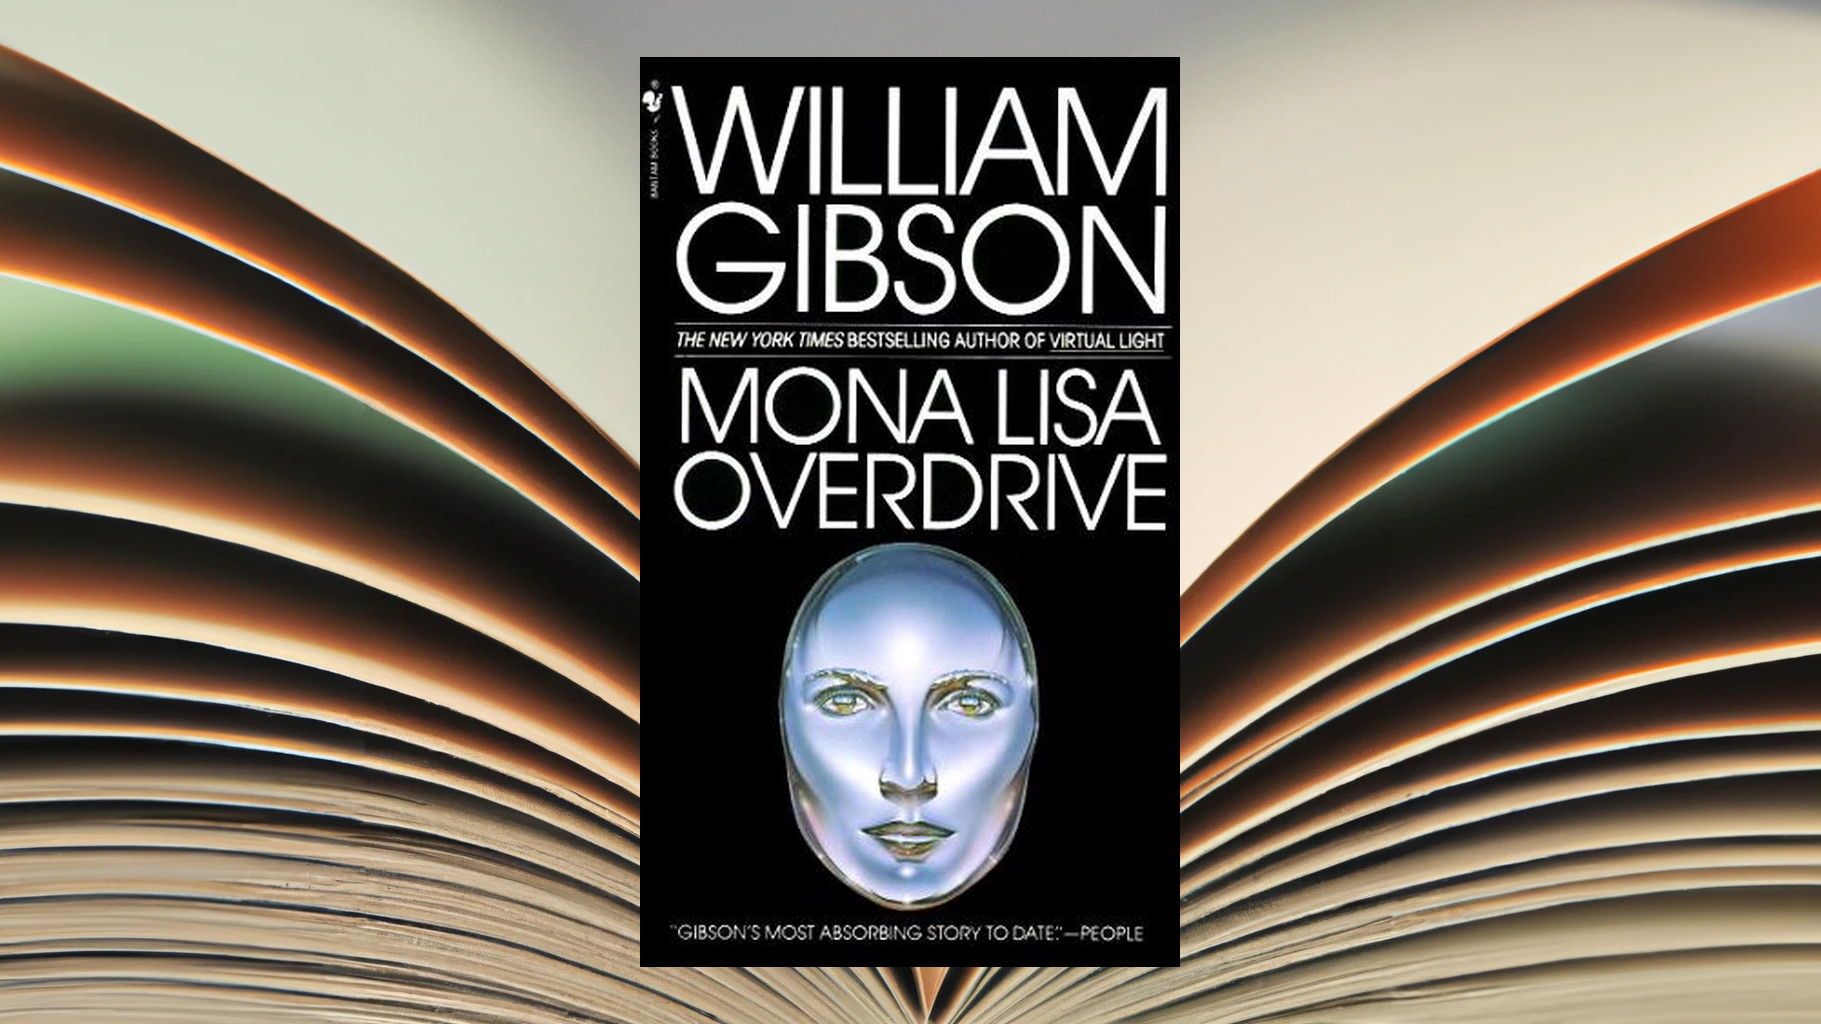 What are you reading? Mona Lisa Overdrive